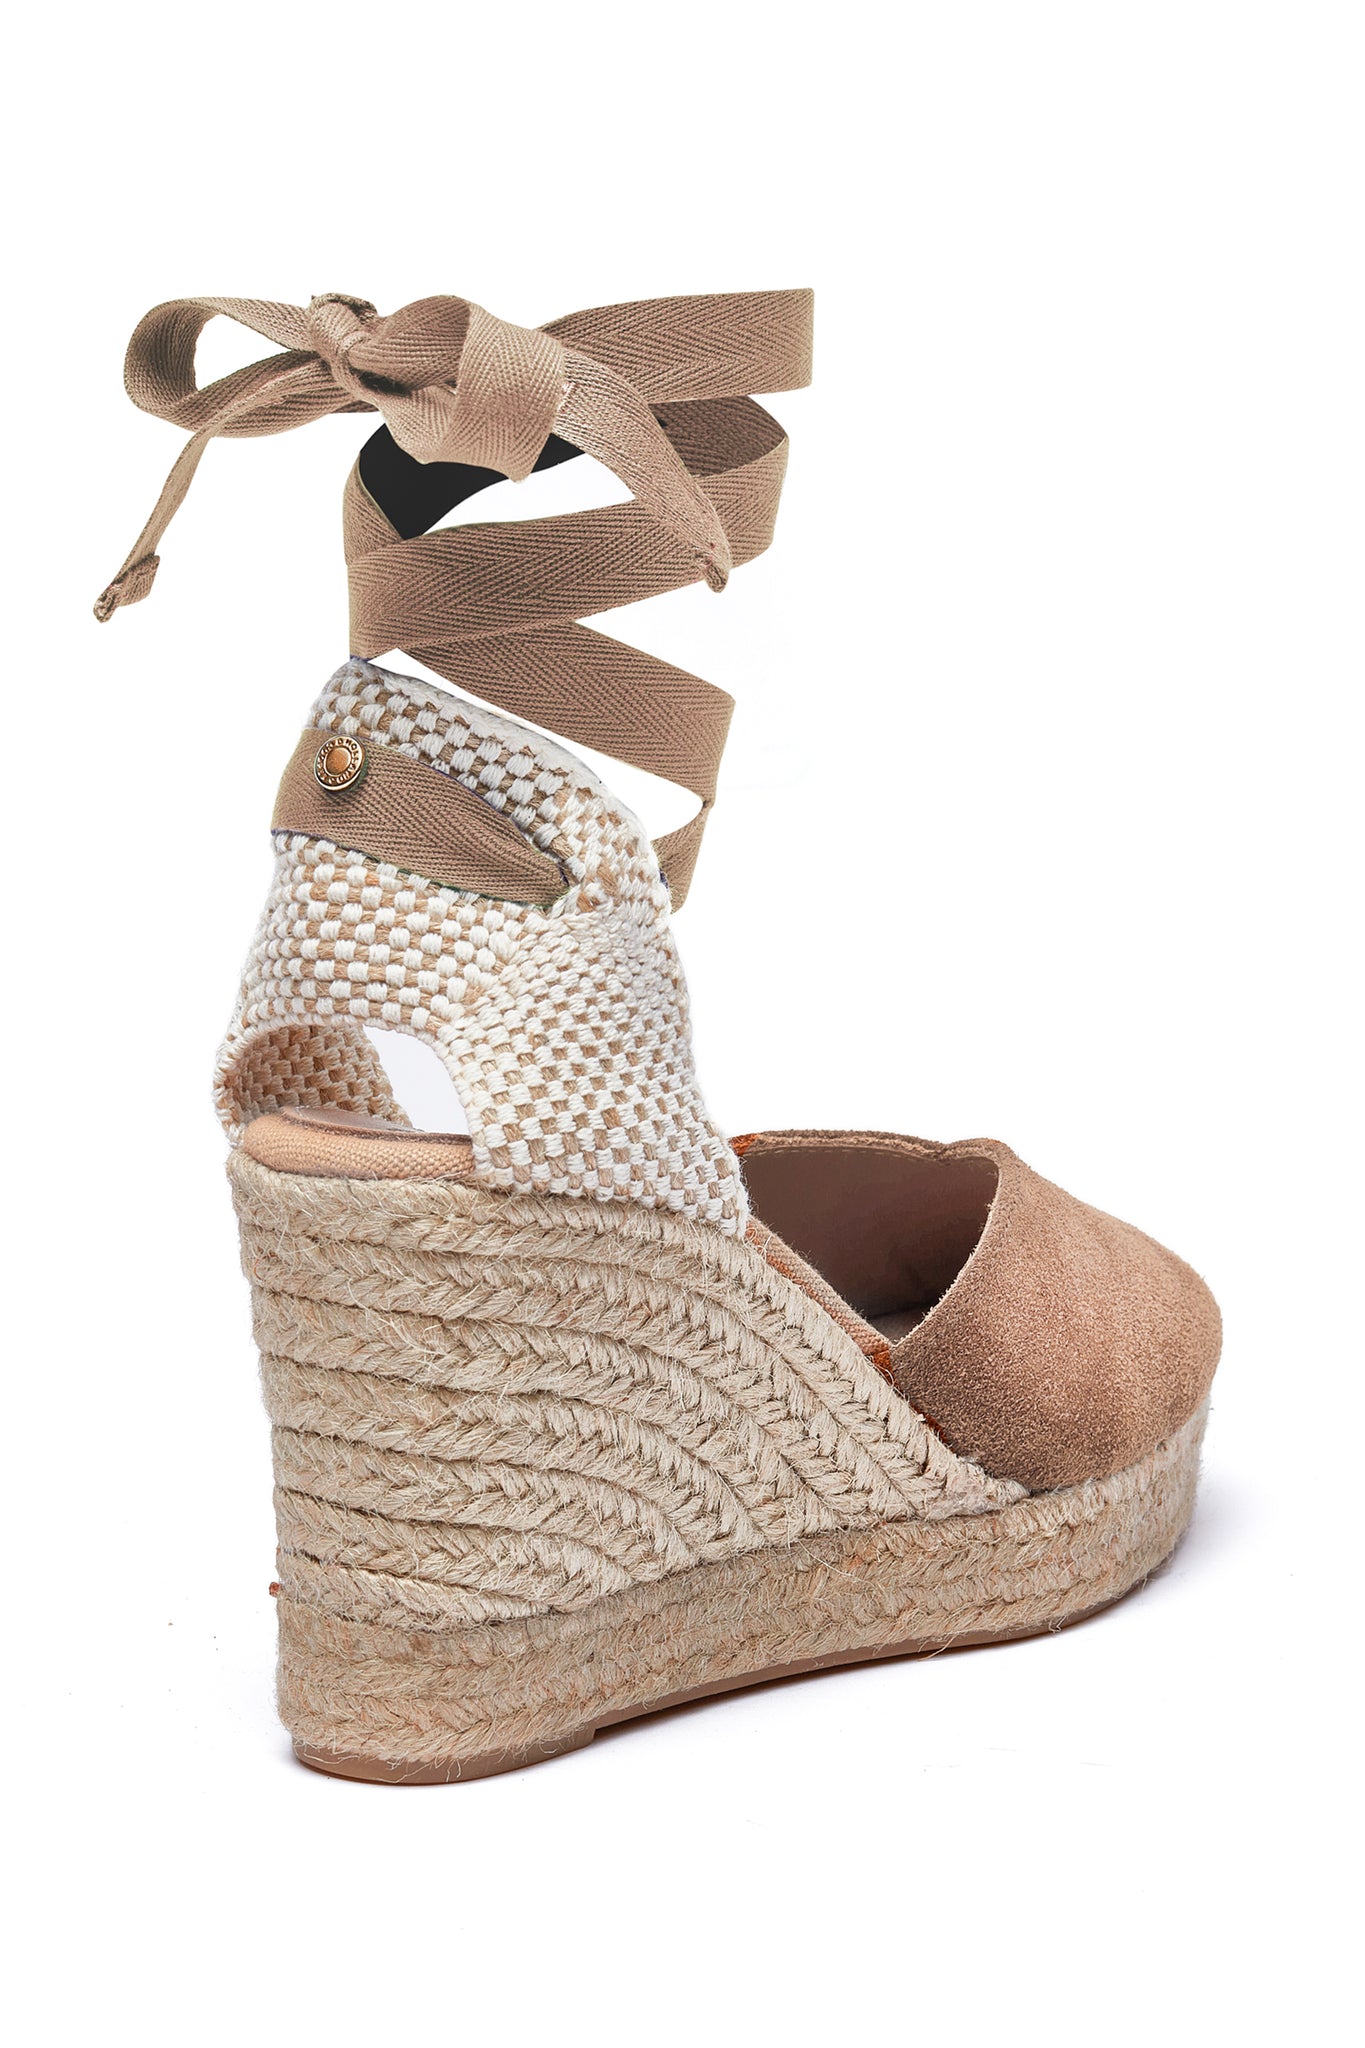 Back of 4 inch braided jute wedge heel with taupe suede top and tie up taupe ribbons around the ankle with gold hardware to the back of the ribbon